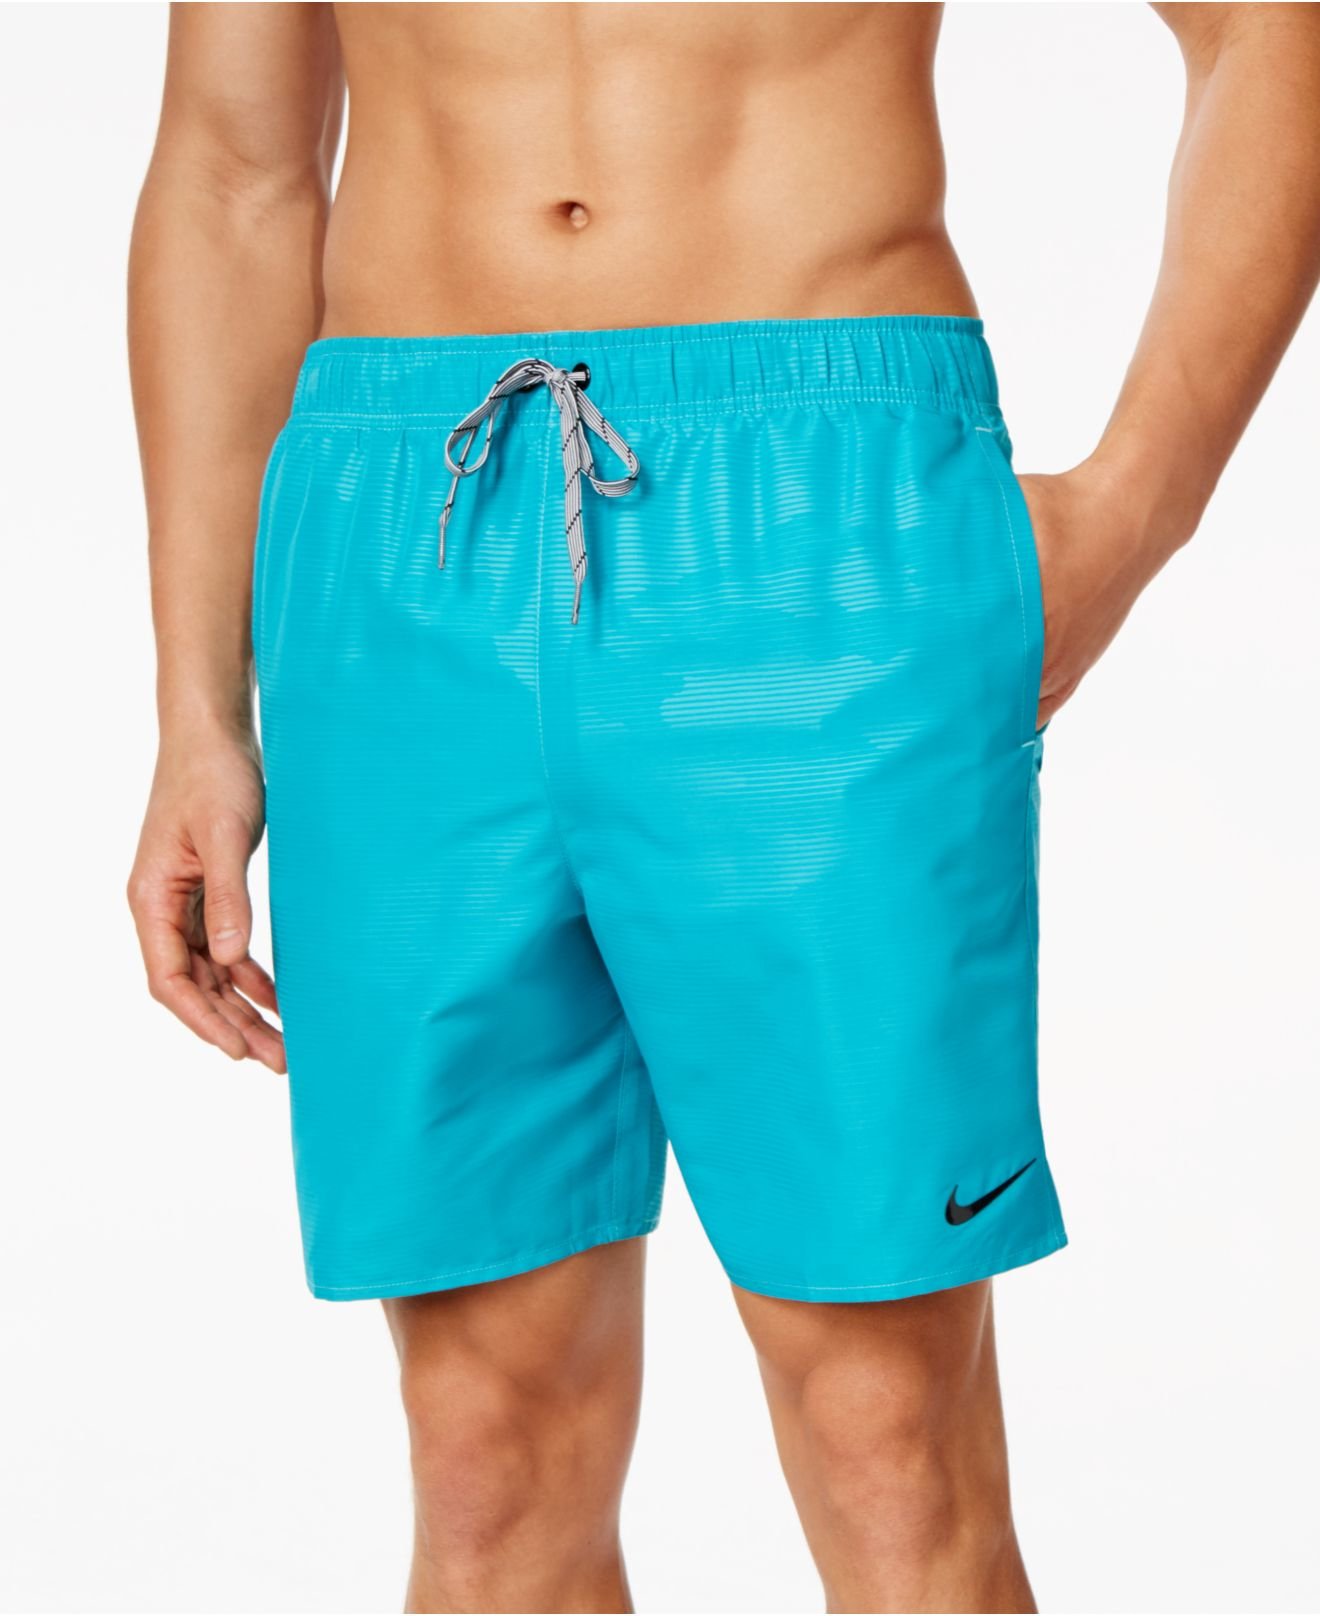 Lyst - Nike Performance Quick Dry Solid Swim Trunks in Blue for Men